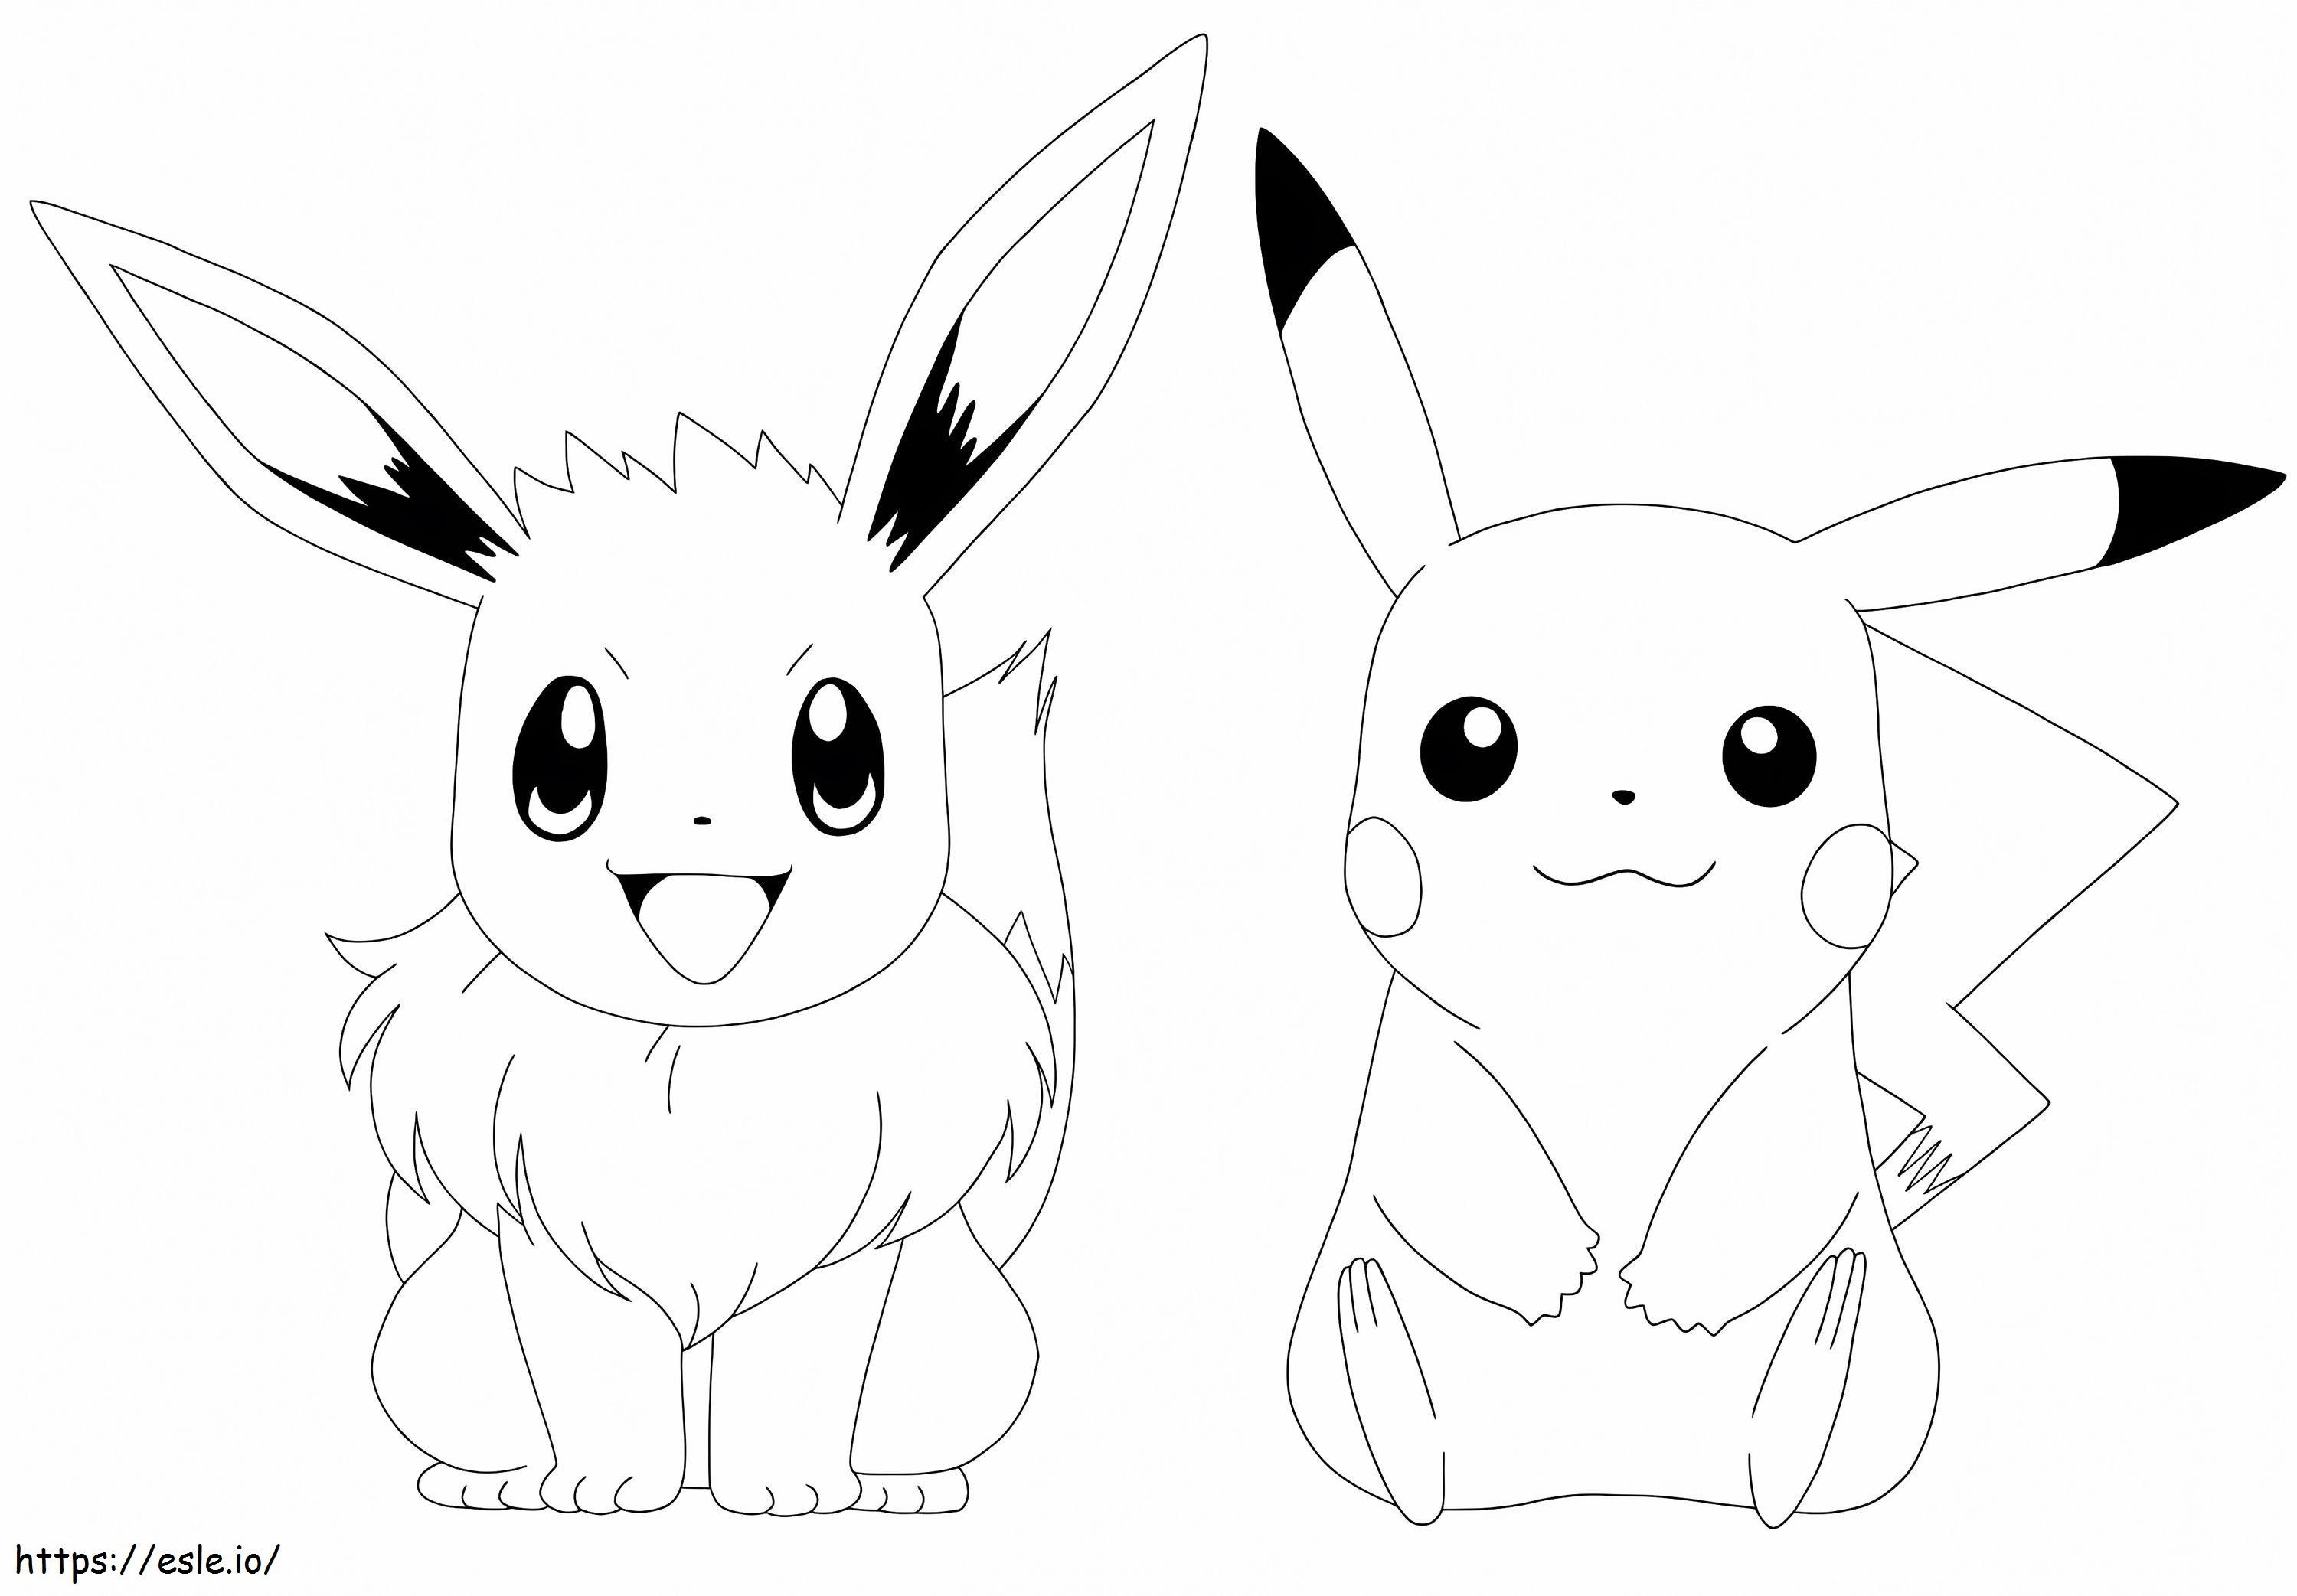 Eevee And Pikachu coloring page